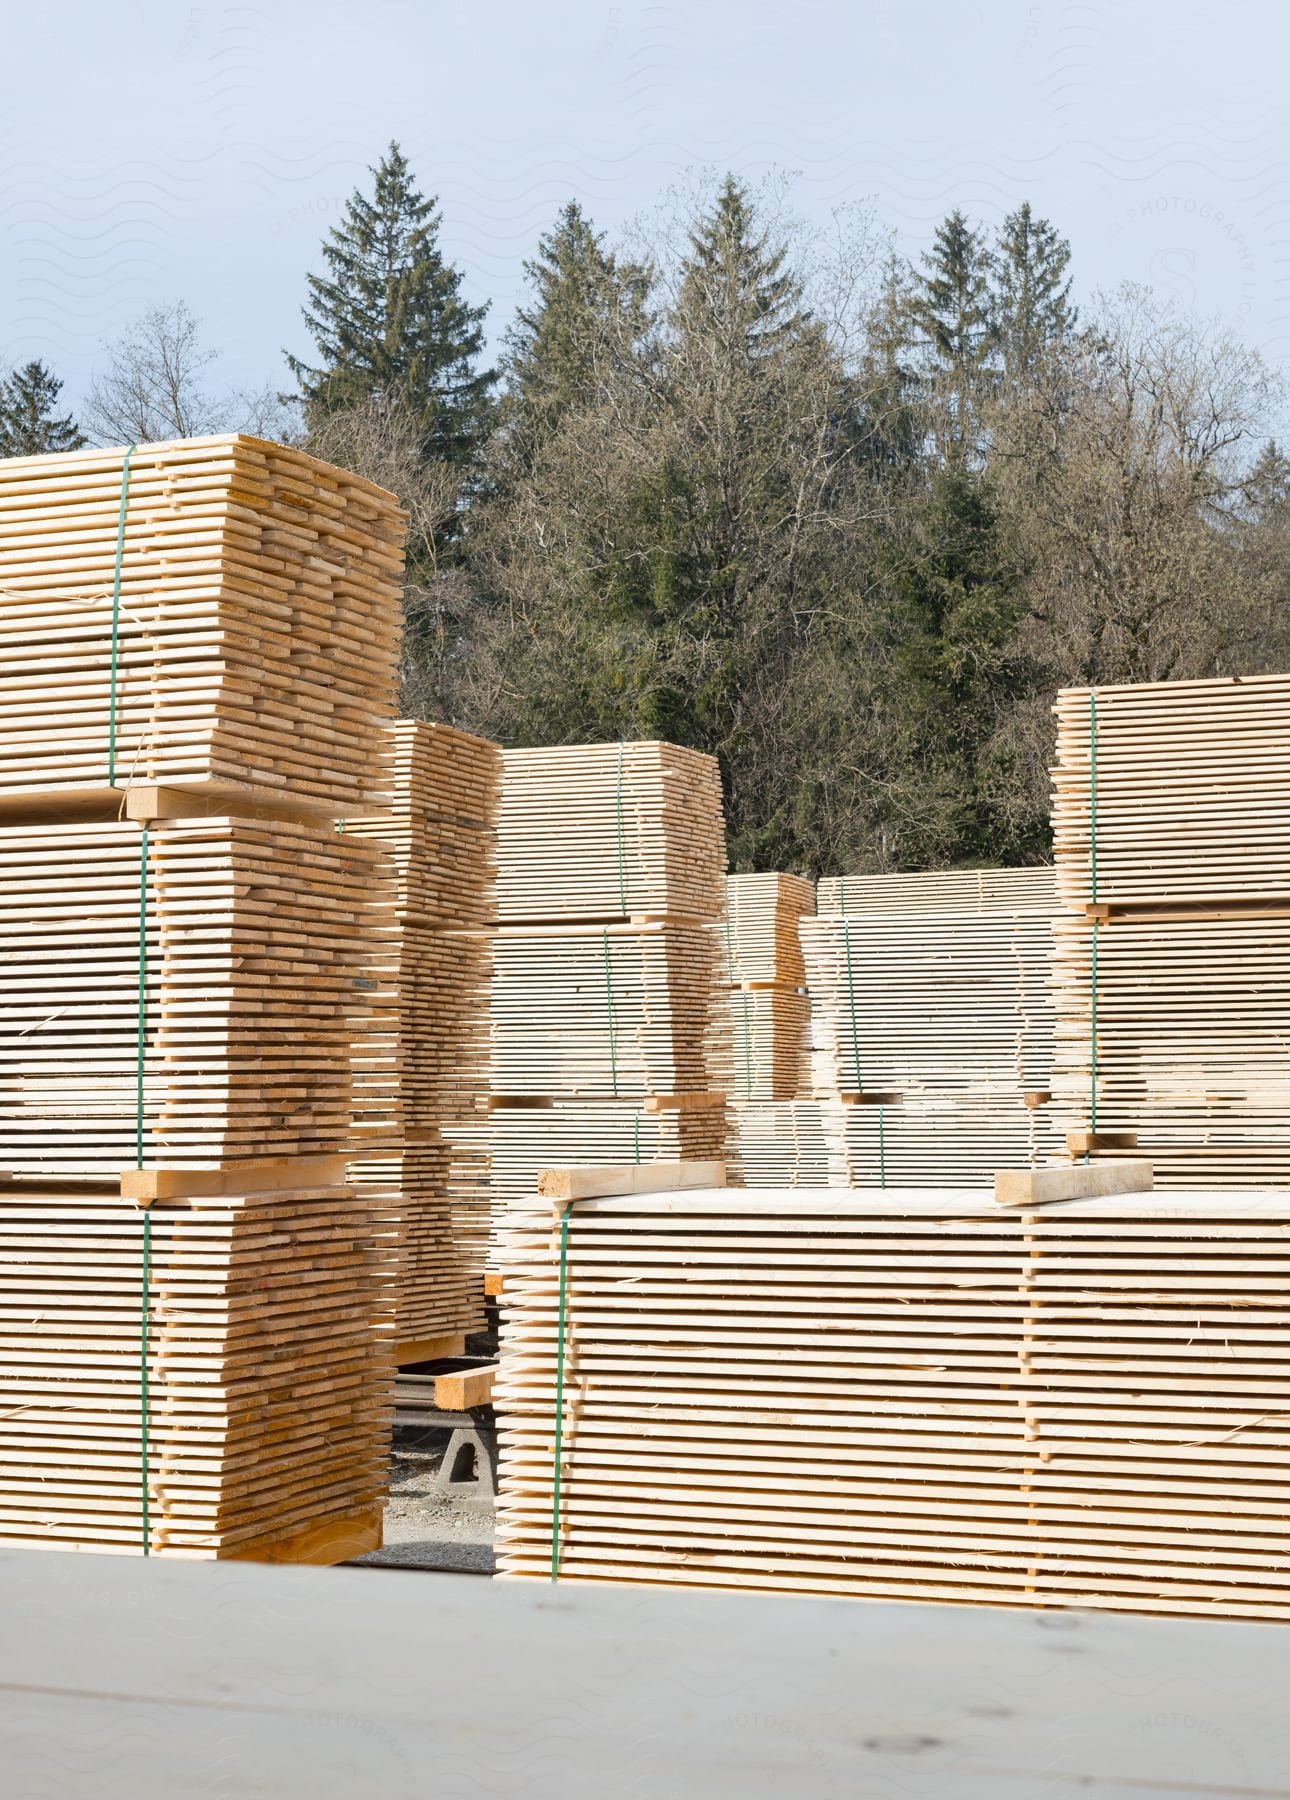 Stacked lumber at a storage yard with trees in the background.